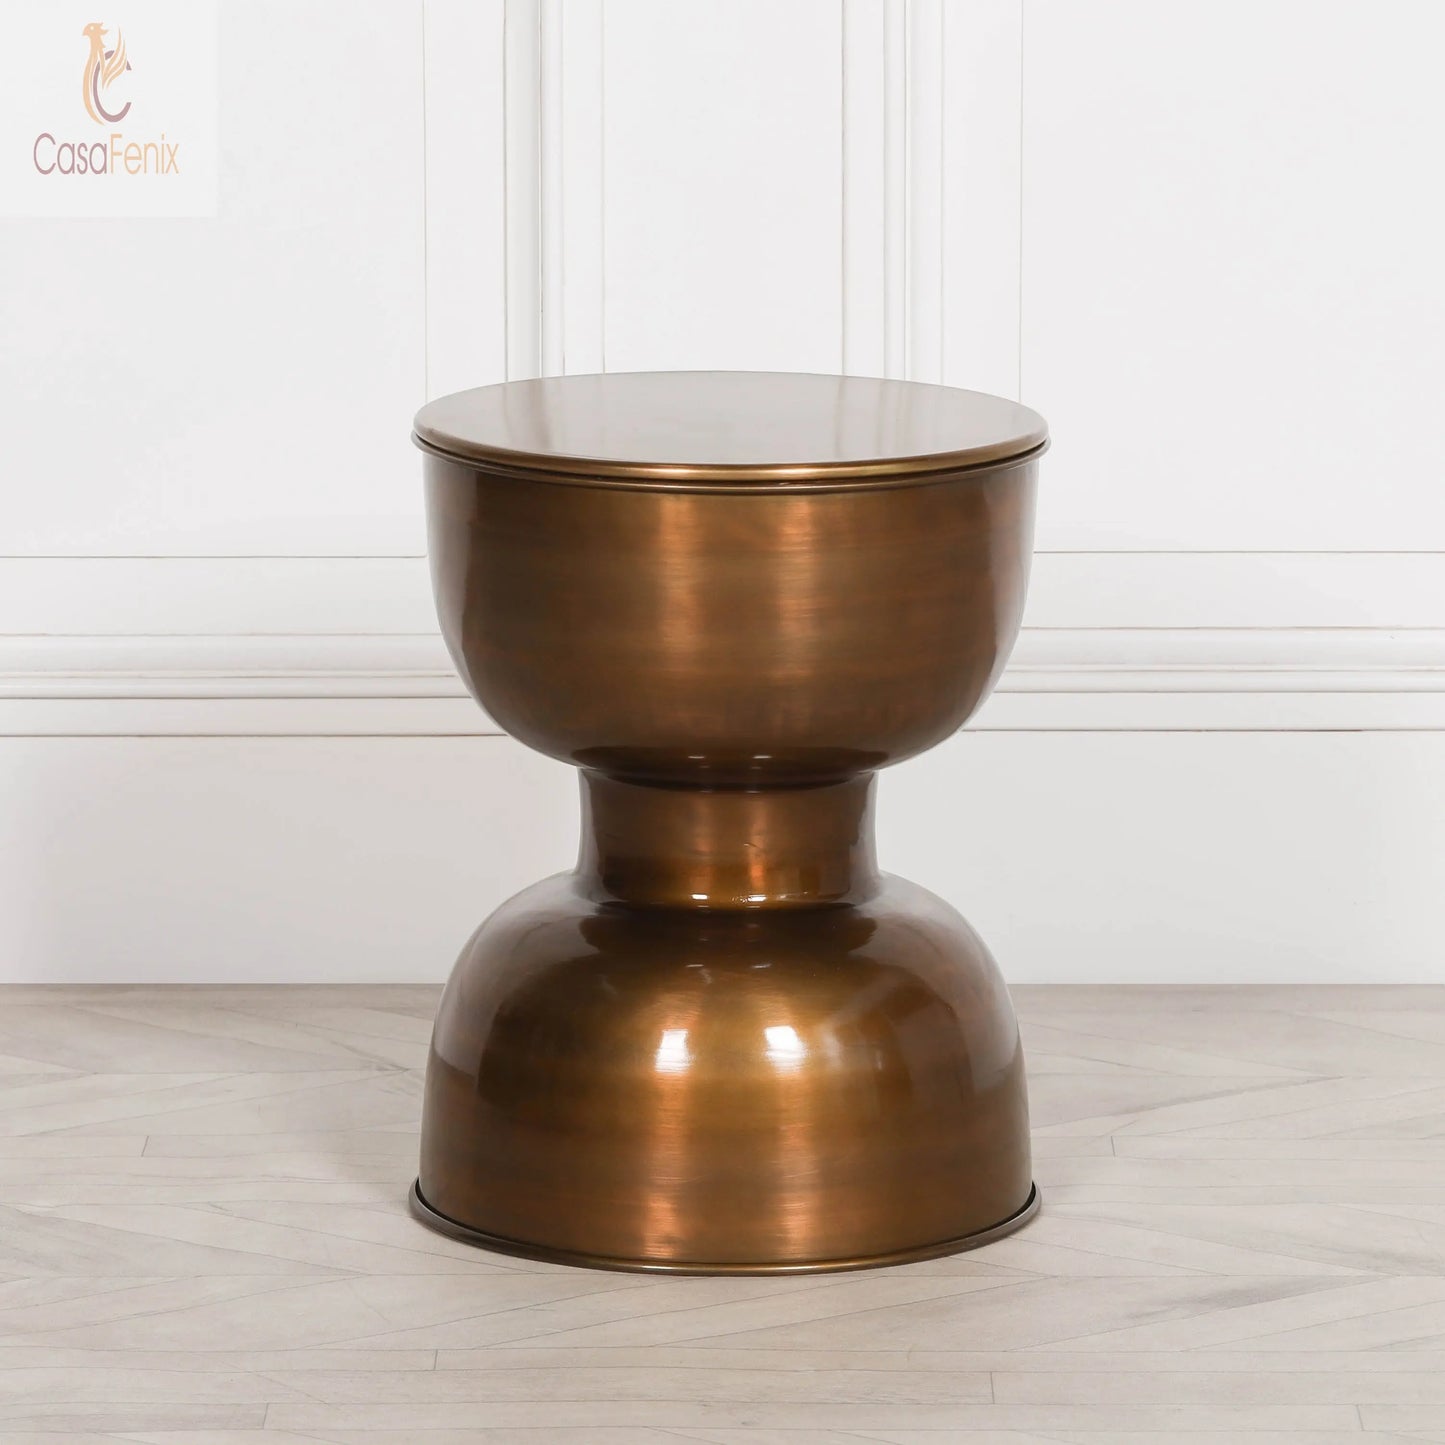 Antique Brass Plated Aluminium Style Hour Glass Style Side Table - CasaFenix